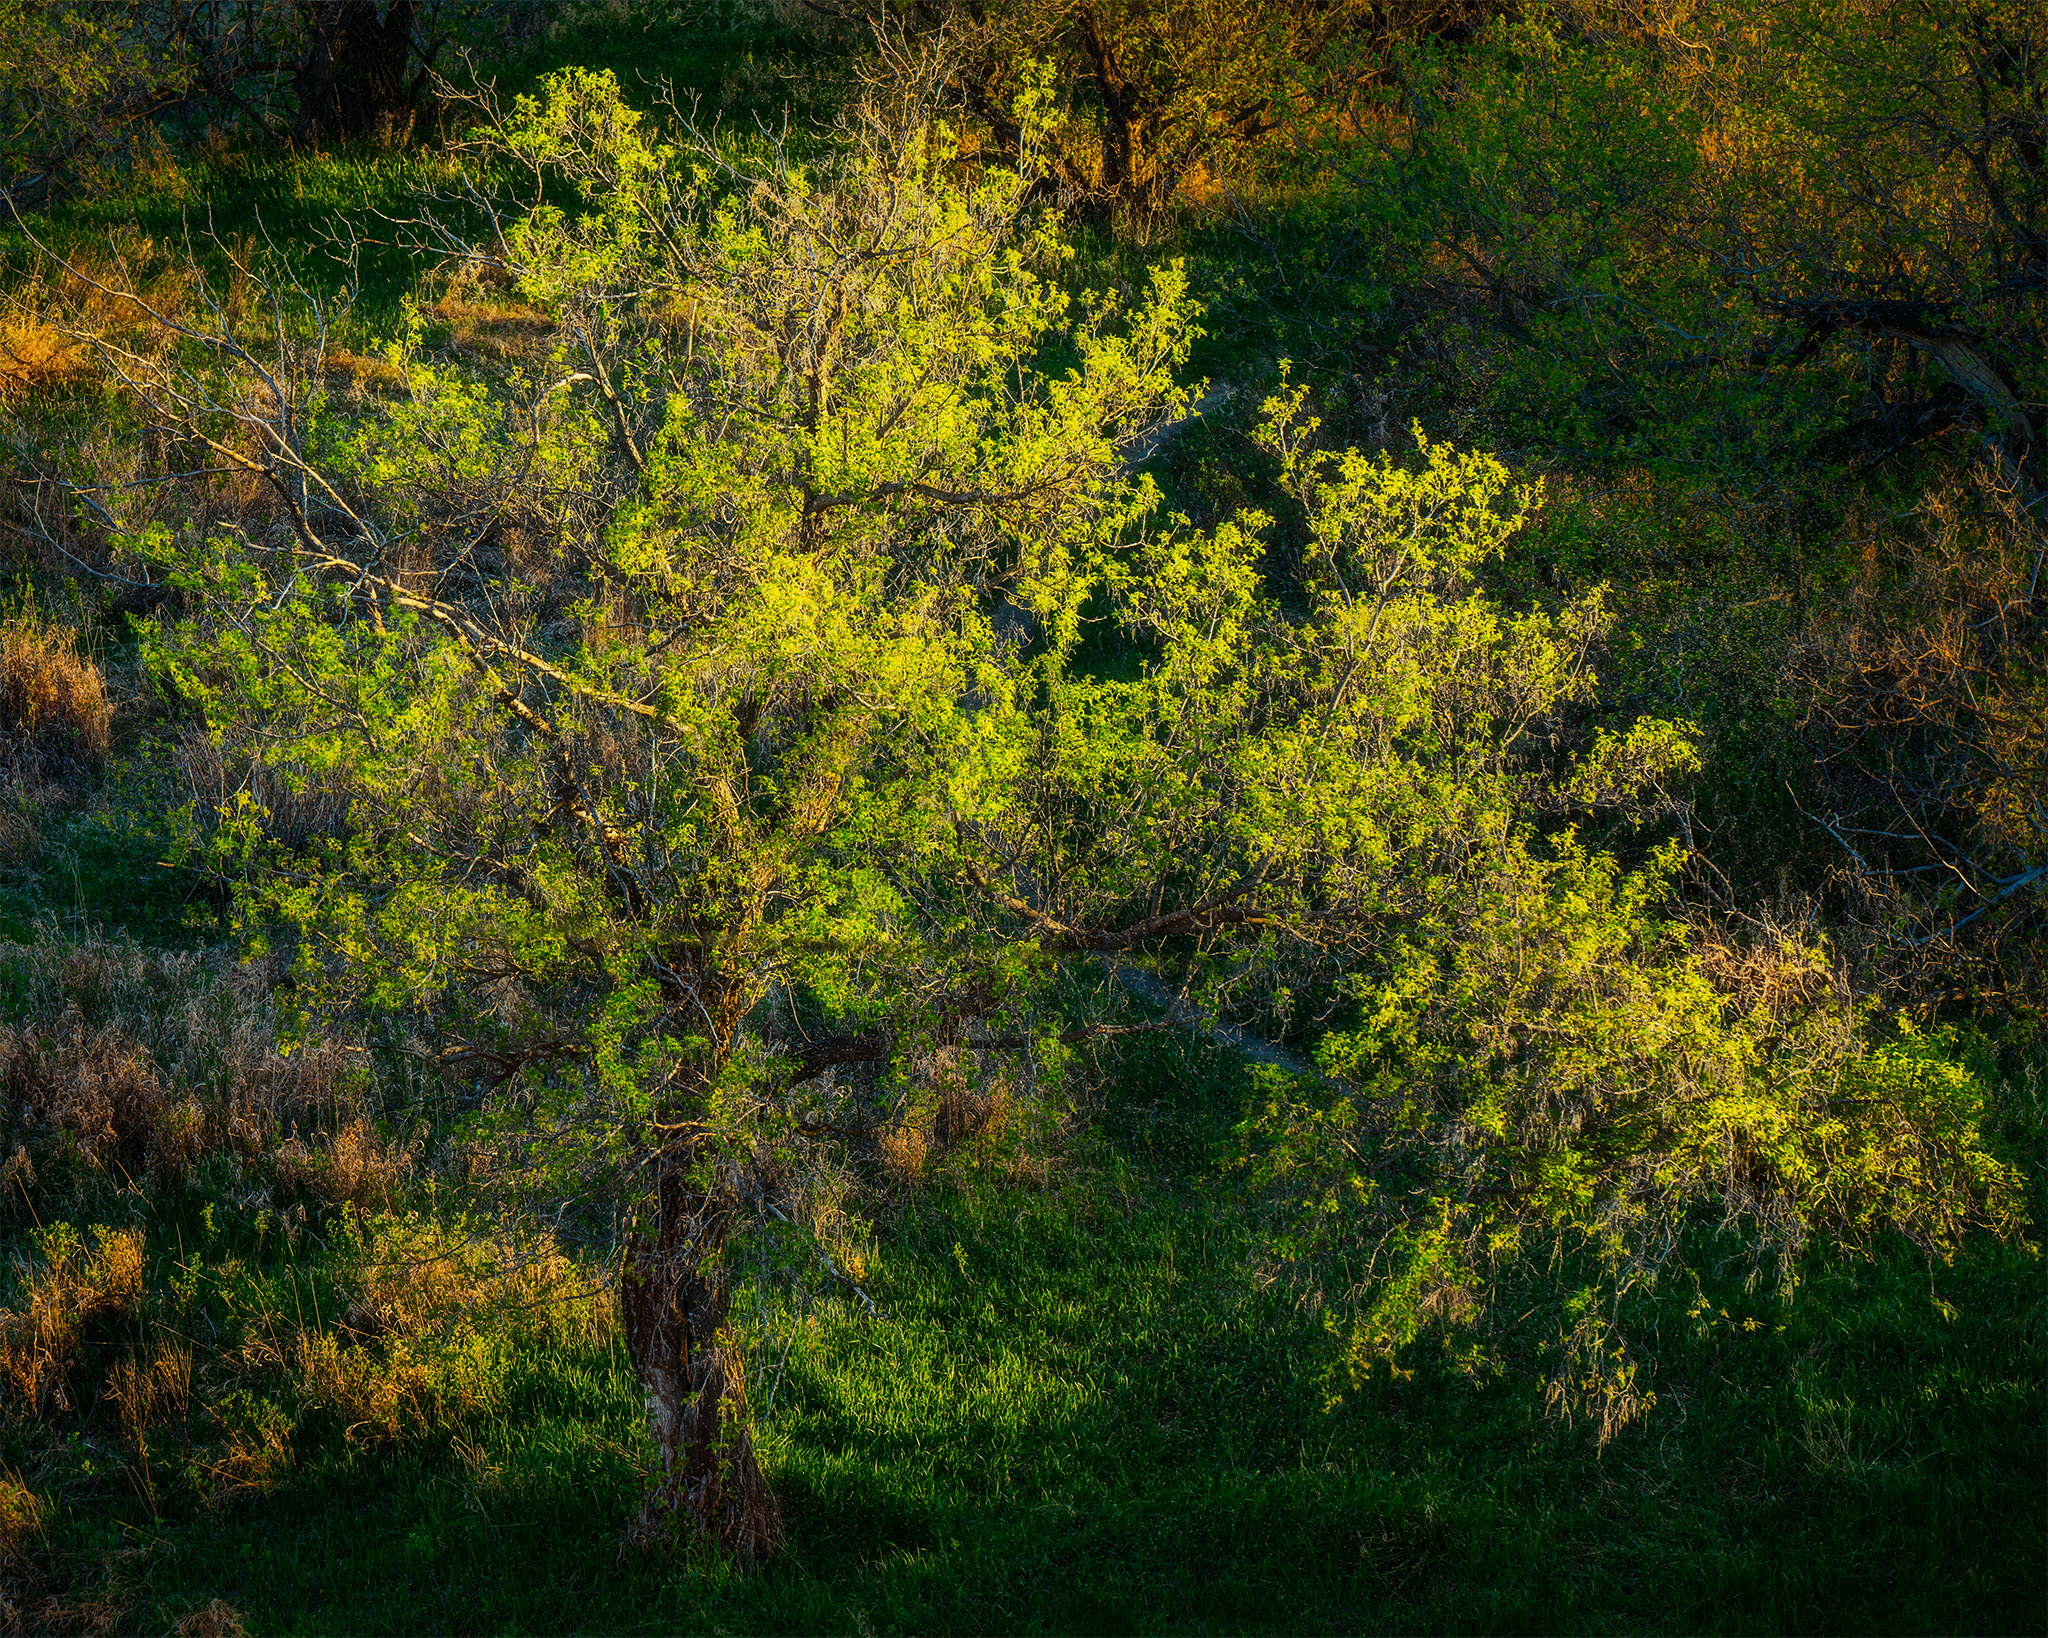 An intimate landscape photograph of an old Cottonwood tree in vibrant spring colour in Wascana Trails, Saskatchewan